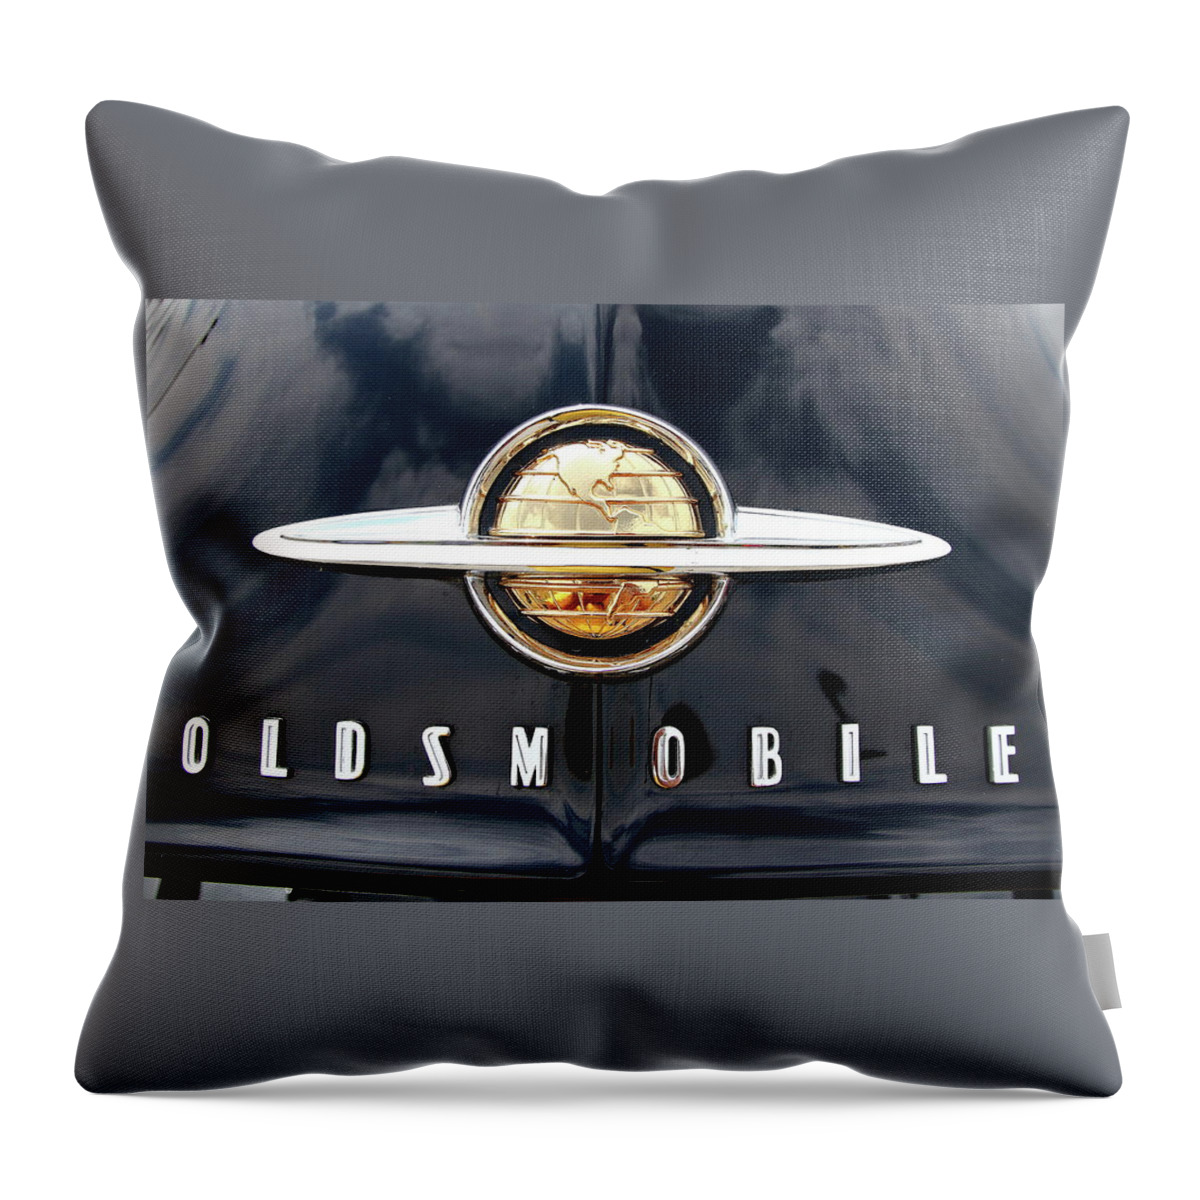 Oldsmobile Throw Pillow featuring the photograph World Class by Lens Art Photography By Larry Trager